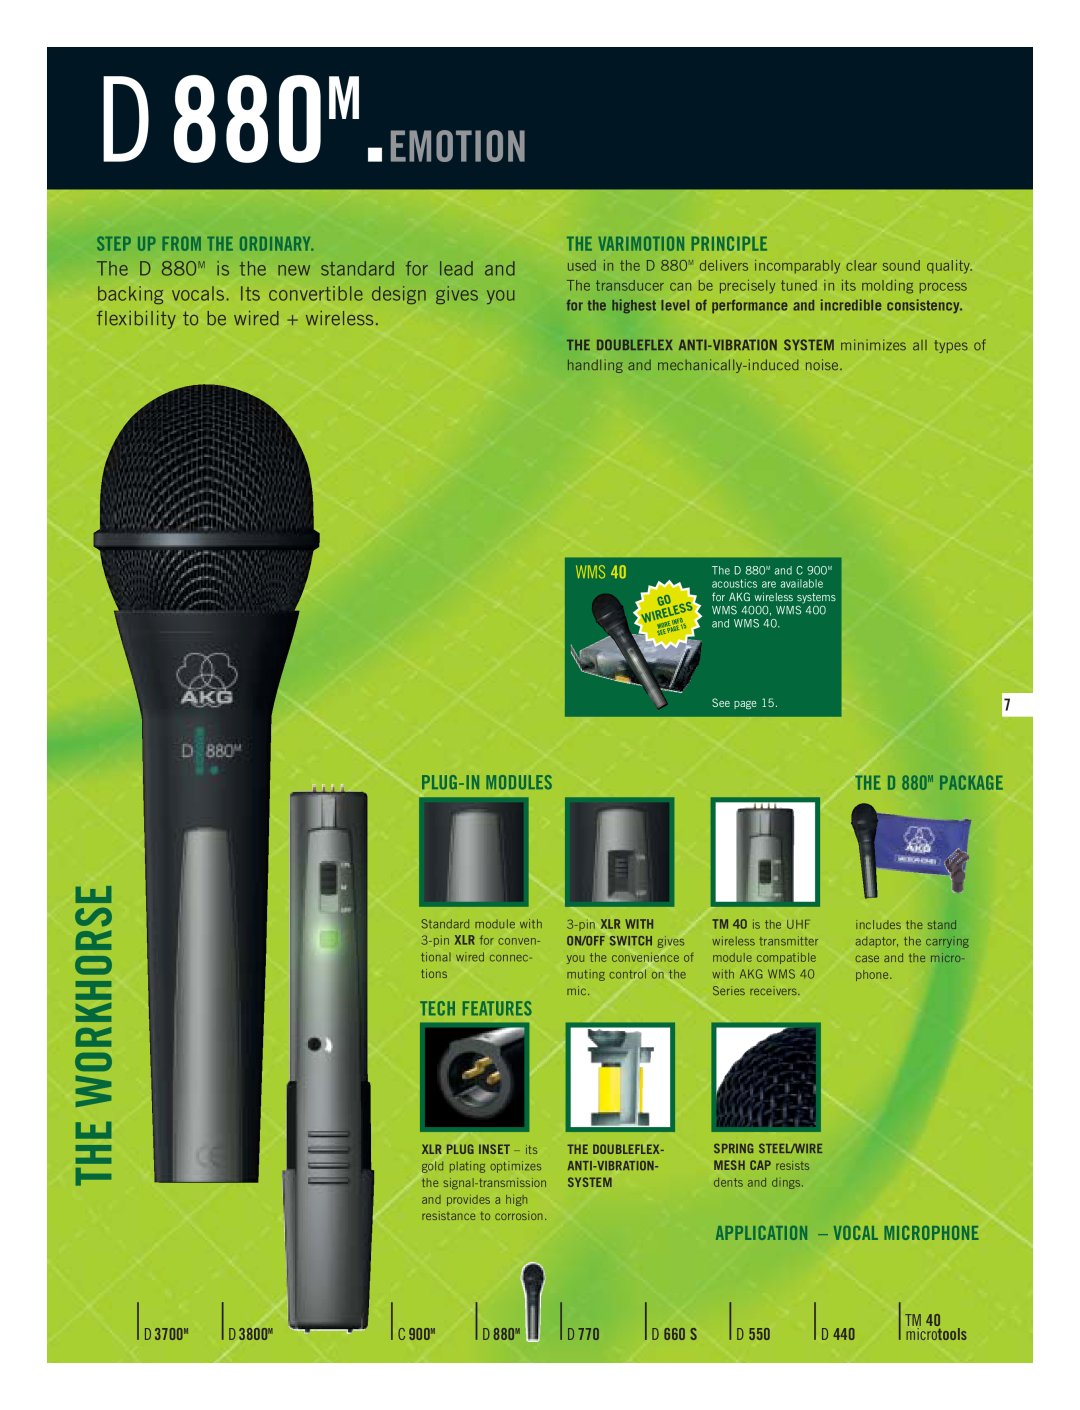 AKG Acoustics D3700M D 880M.EMOTION, Step Up From The Ordinary, The Varimotion Principle, THE D 880M PACKAGE, Workhorse 